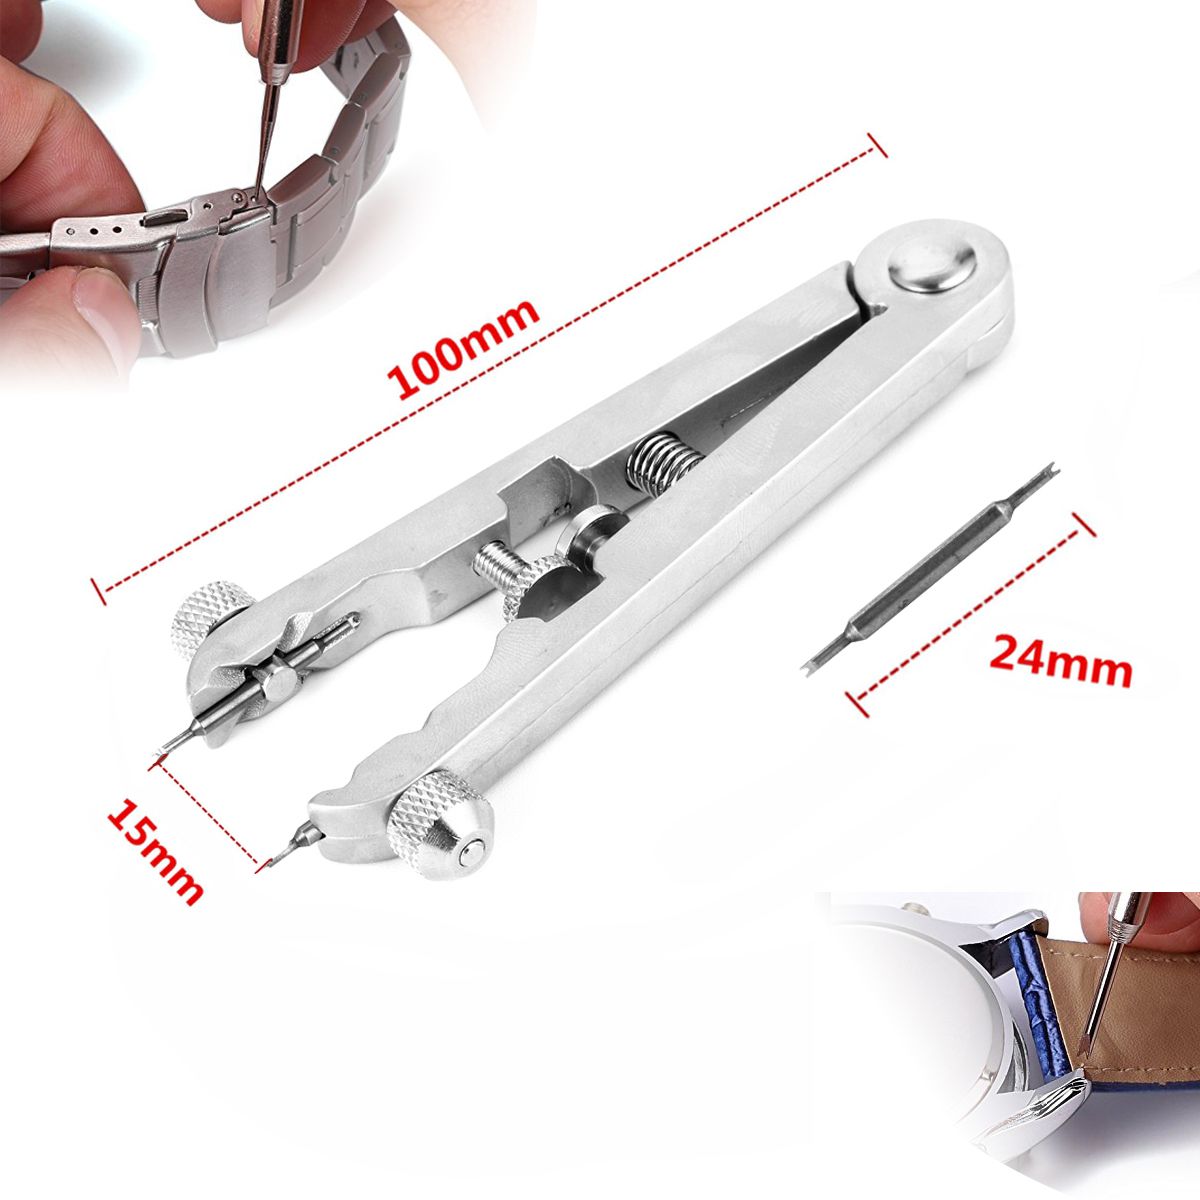 Watch-Bracelet-Spring-Bar-6825-Standard-Plier-Remover-Replace-Removing-Tool-1262786